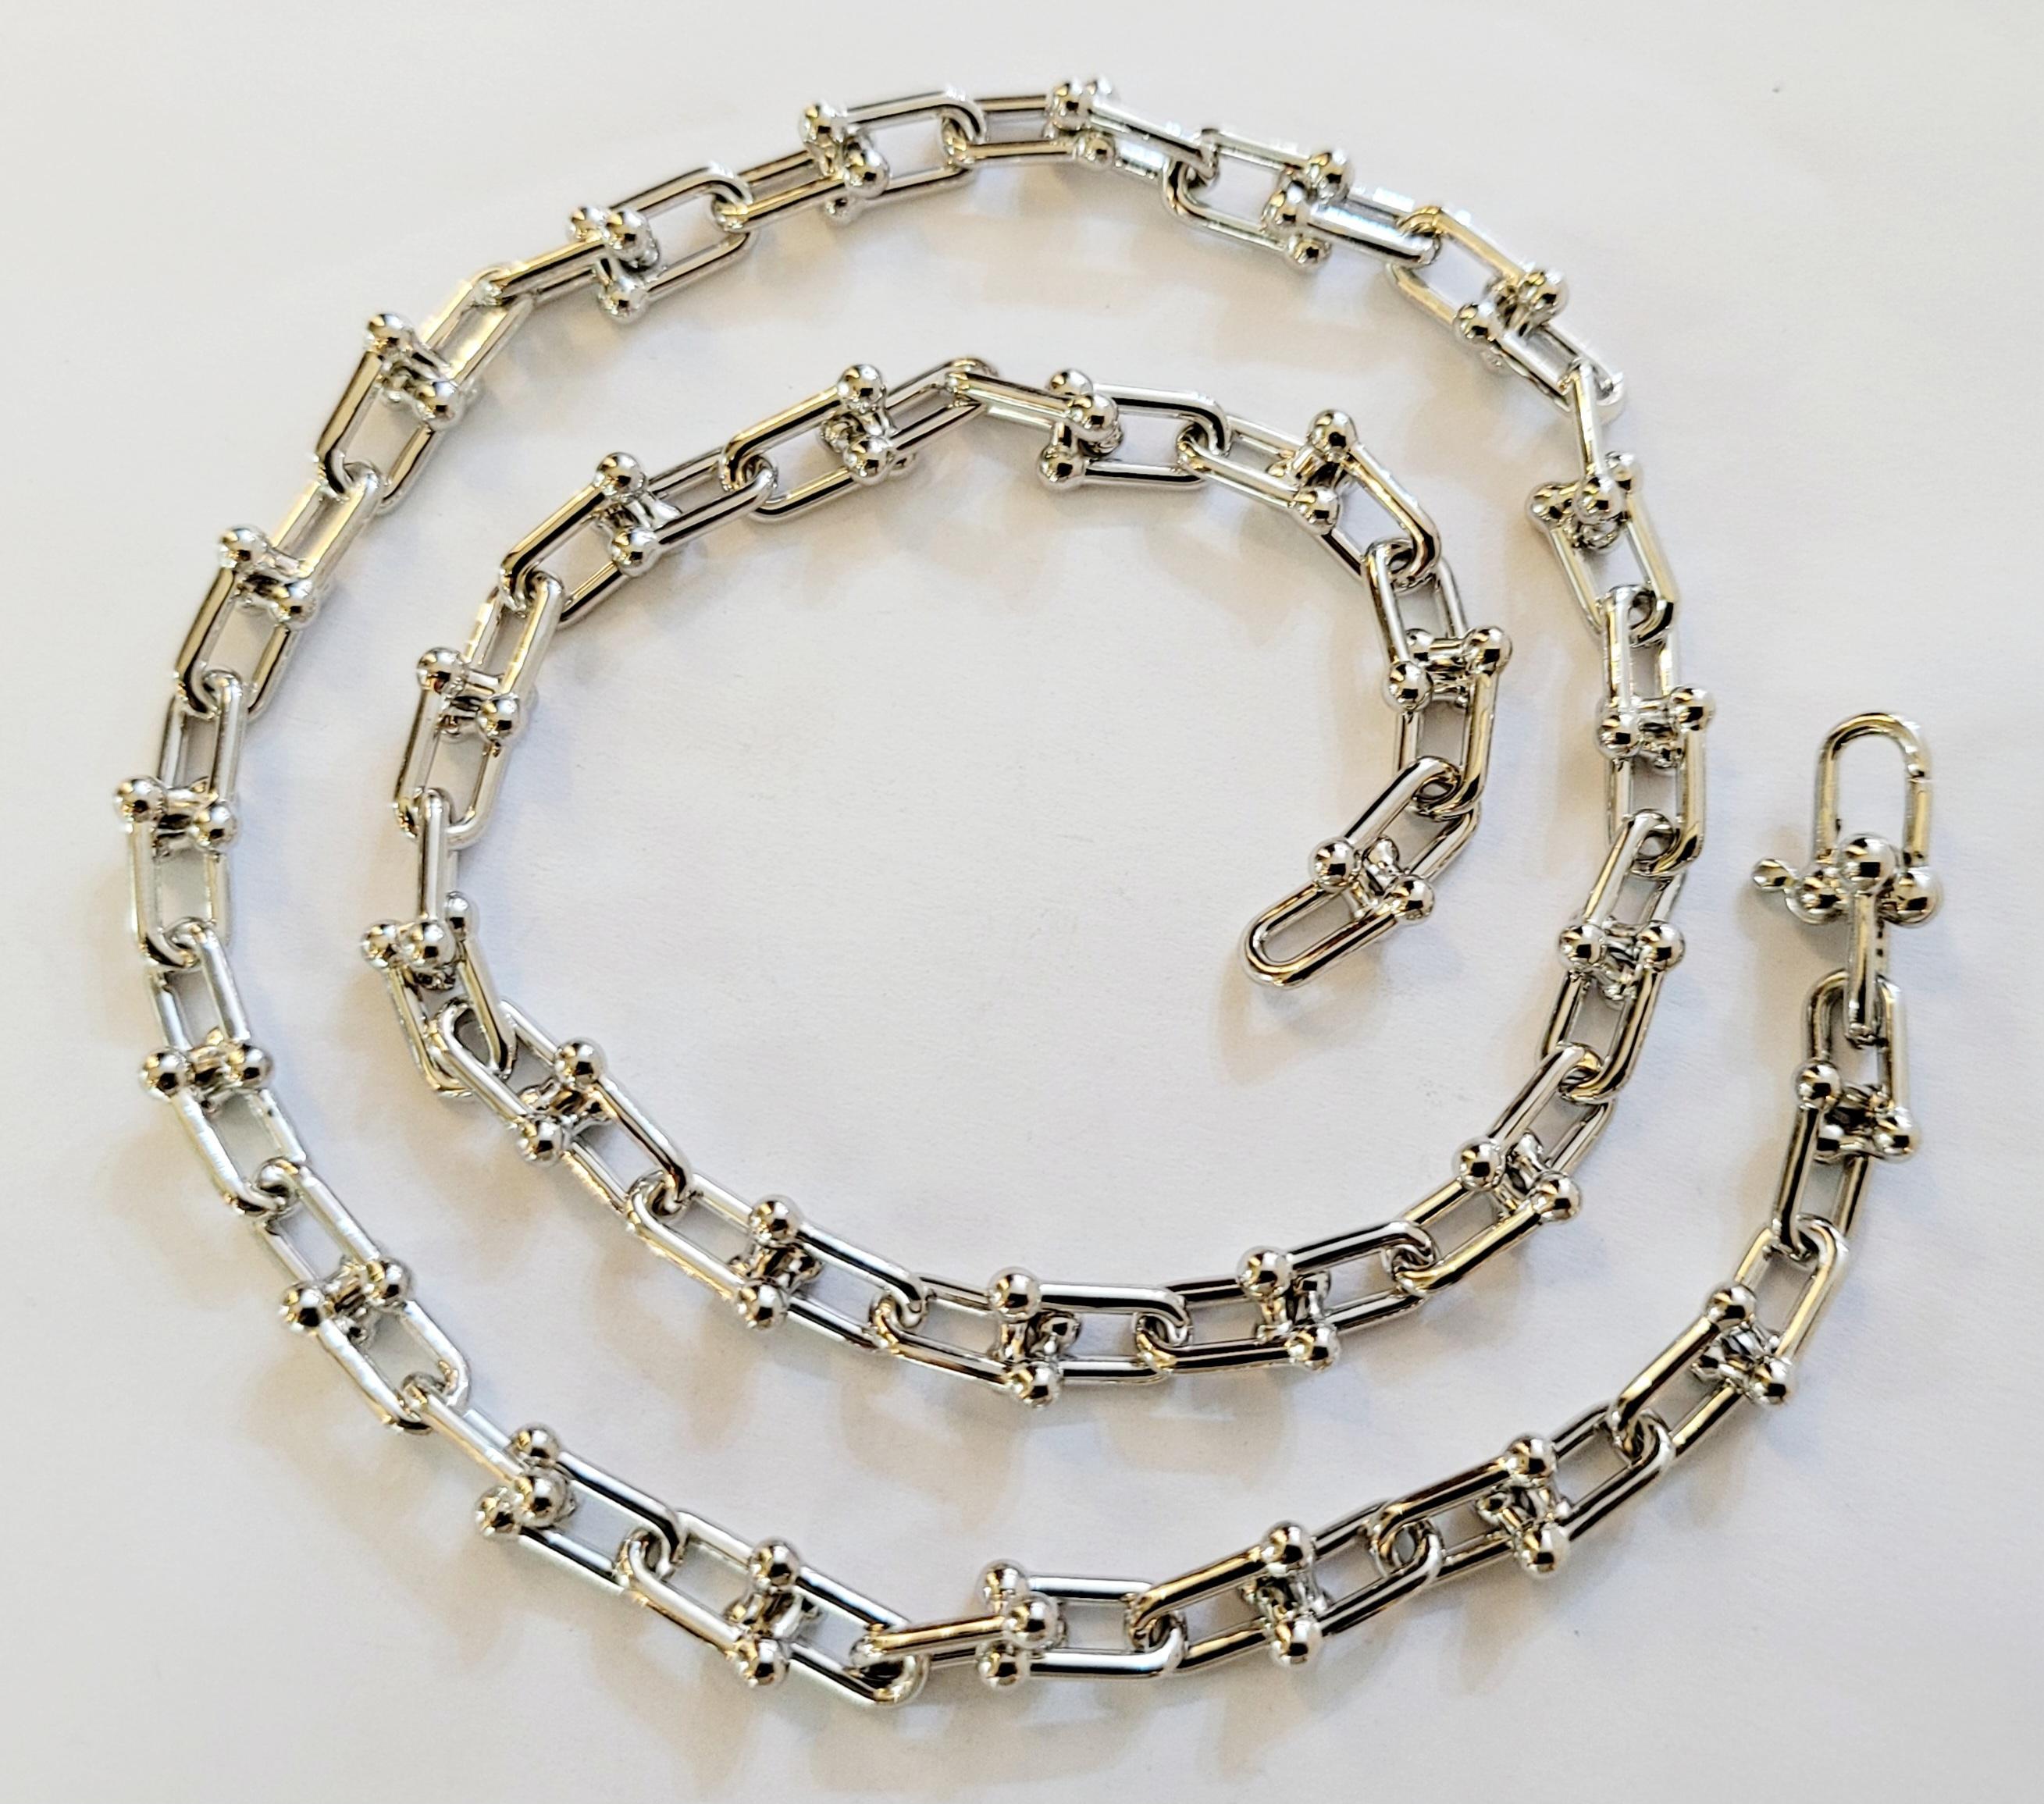 Tiffany Hard Wear Small Link Necklace in Sterling Silver In New Condition For Sale In New York, NY